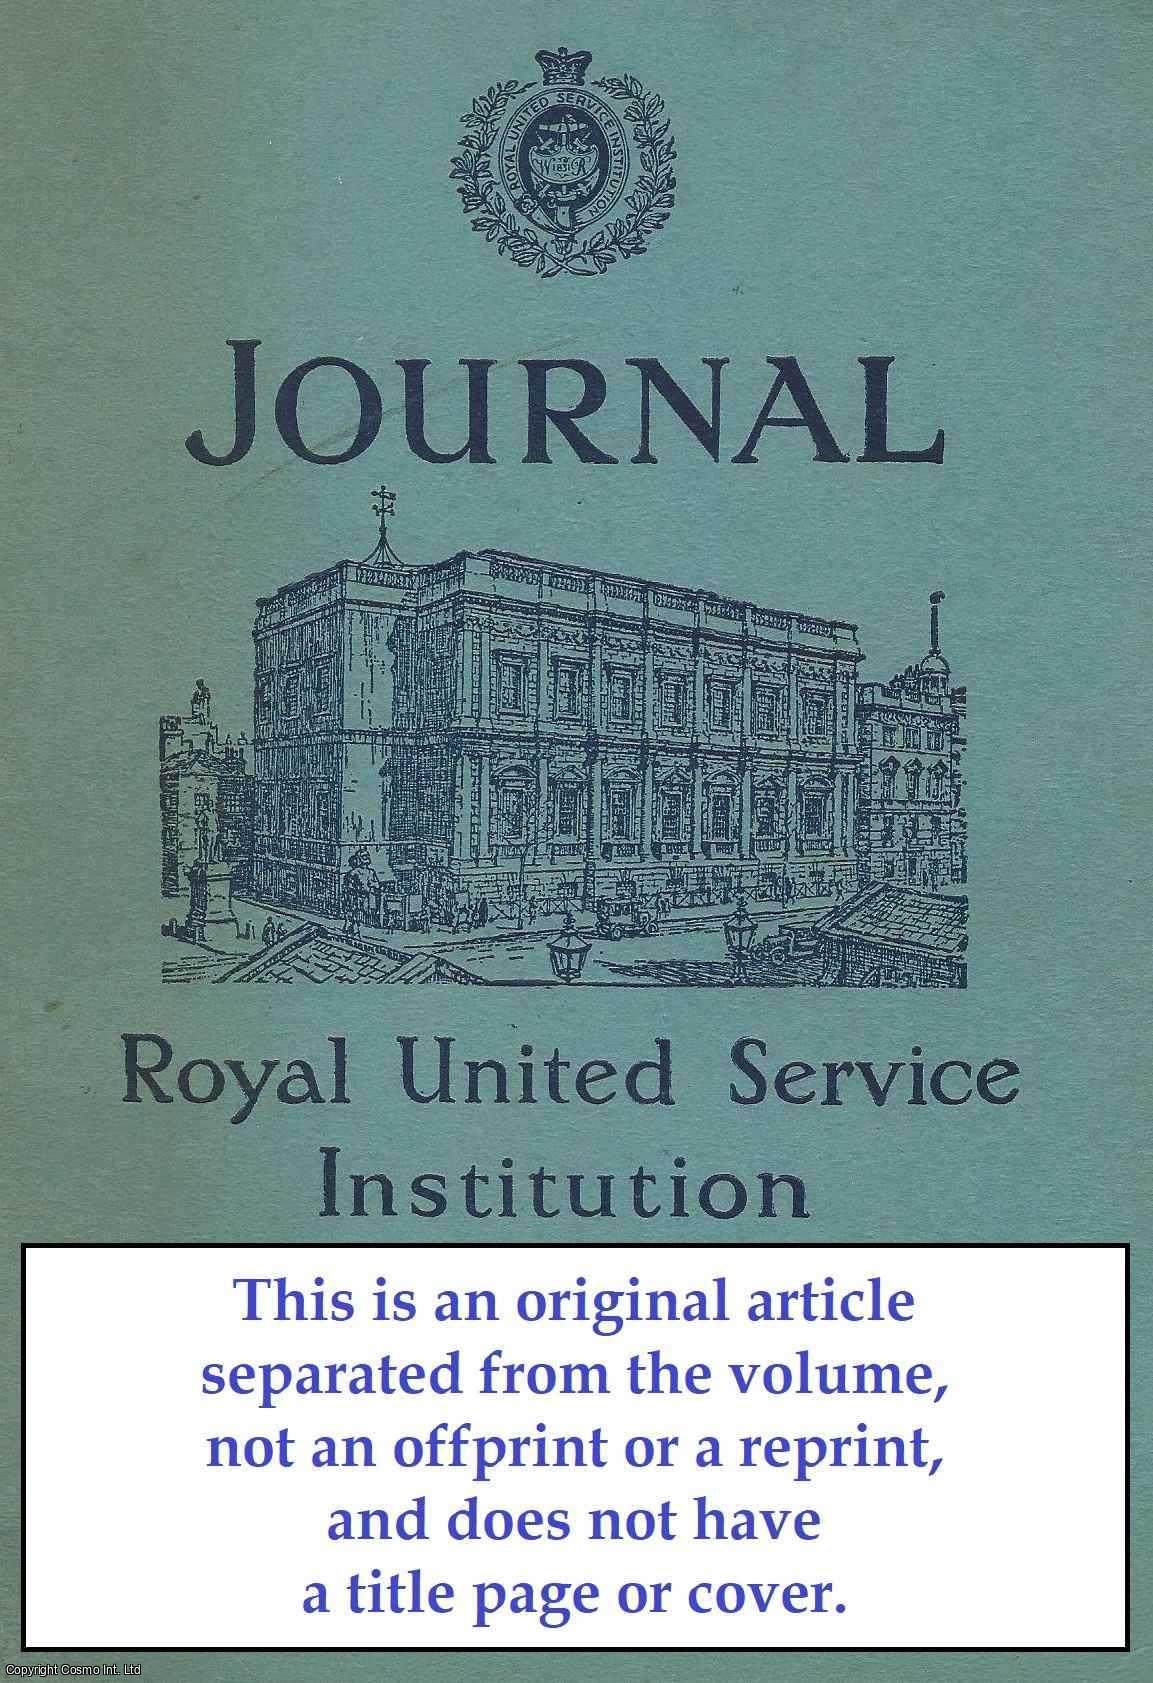 W. B. Rowbotham - The British Occupation of The Diamond Rock, 1804-1805 - II. An original article from Journal of The Royal United Service Institution, 1956.